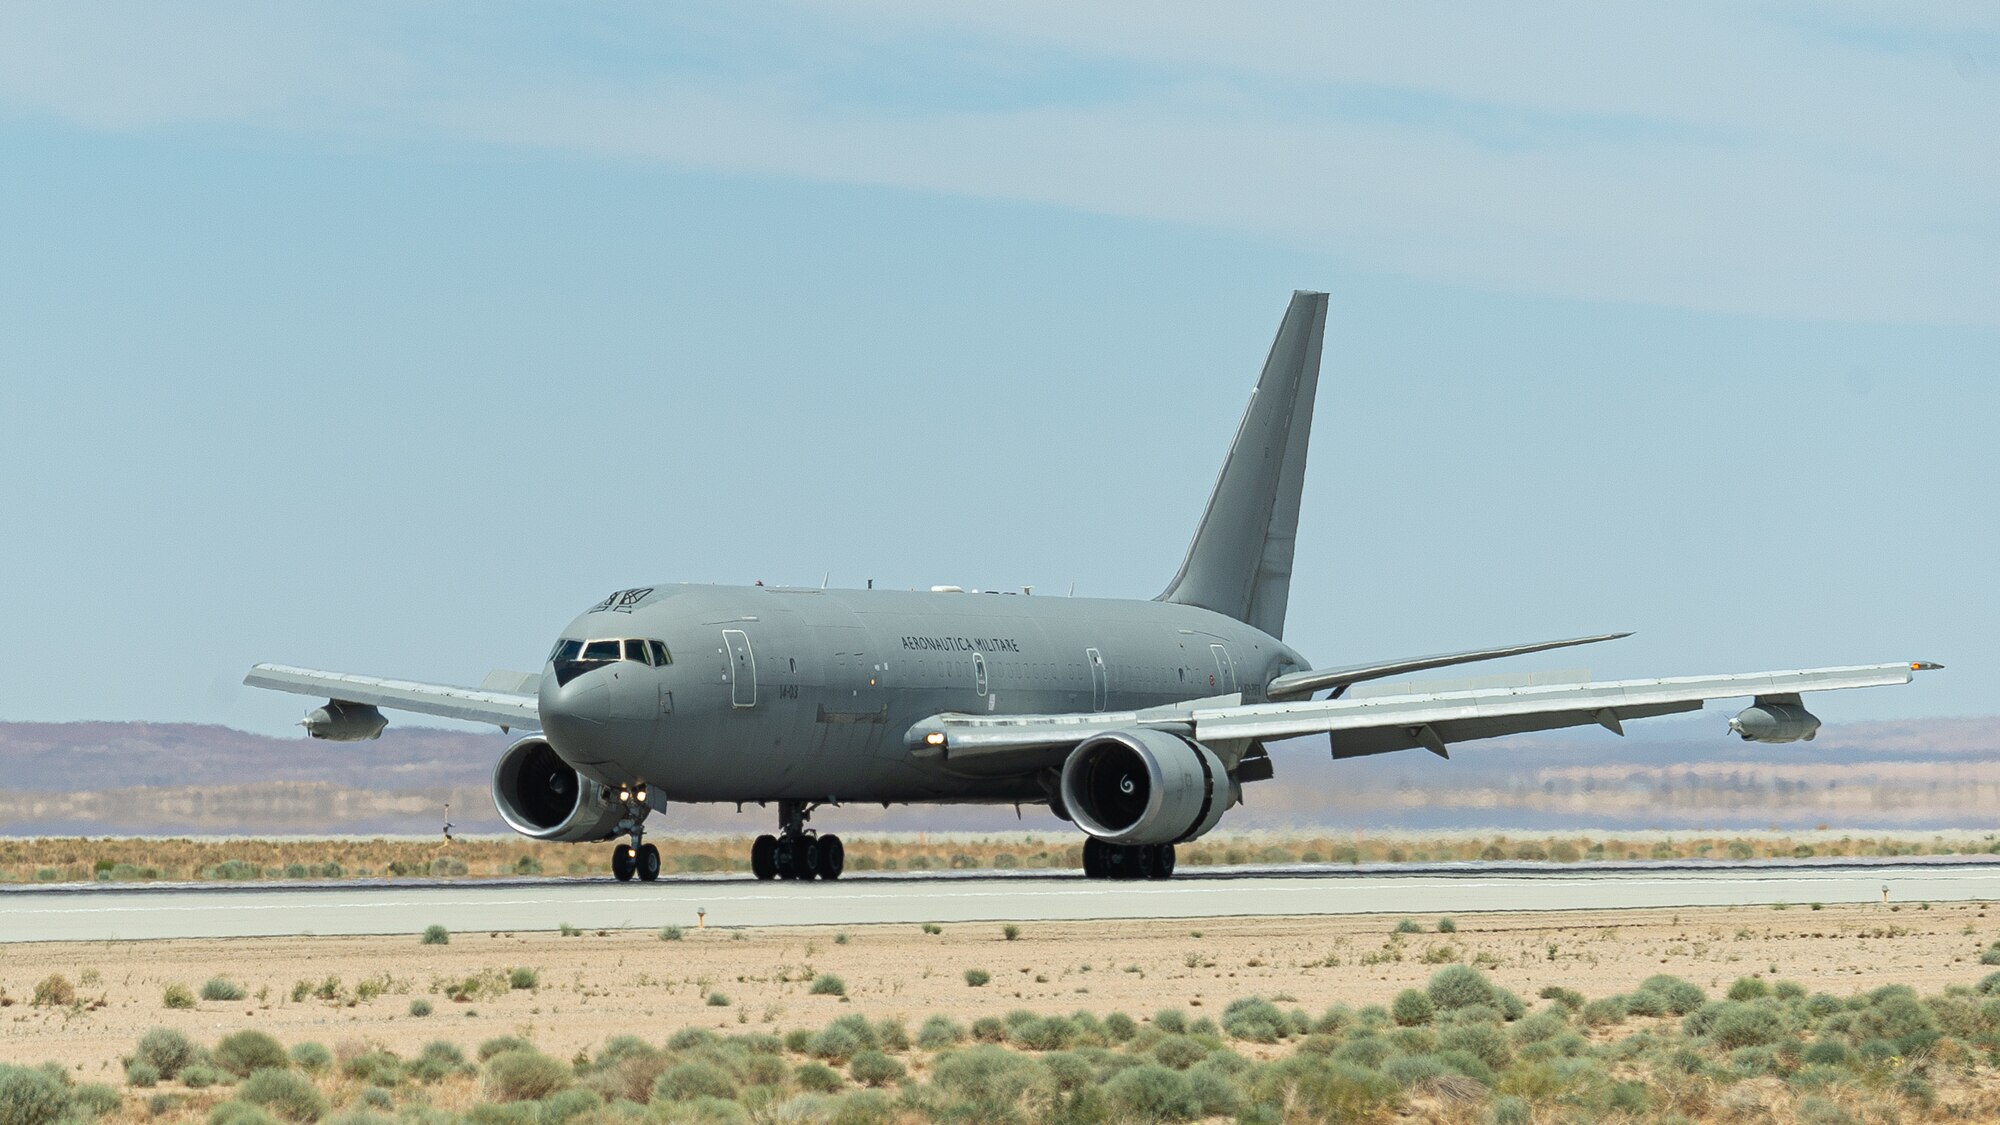 An Italian Air Force KC-767 lands at Edwards Air Force Base, California, May 9. The KC-767 was flown in to support flight tests with an Italian PA-200 Tornado recently. (Air Force photo by Josh McClanahan)